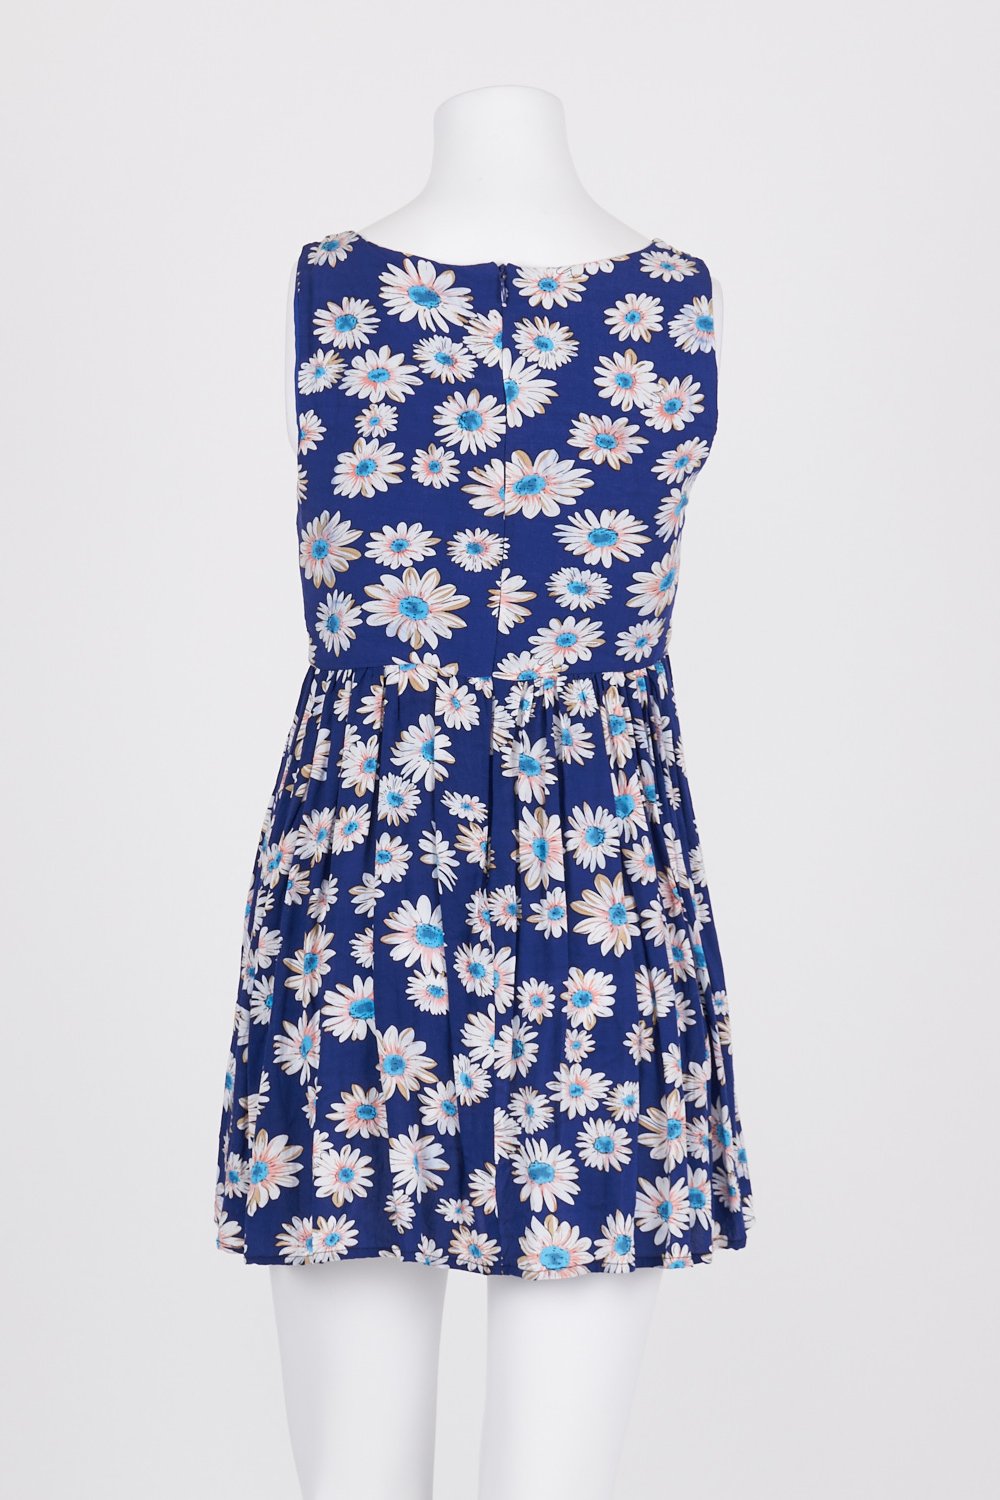 Quirky Circus Blue Floral Dress 10